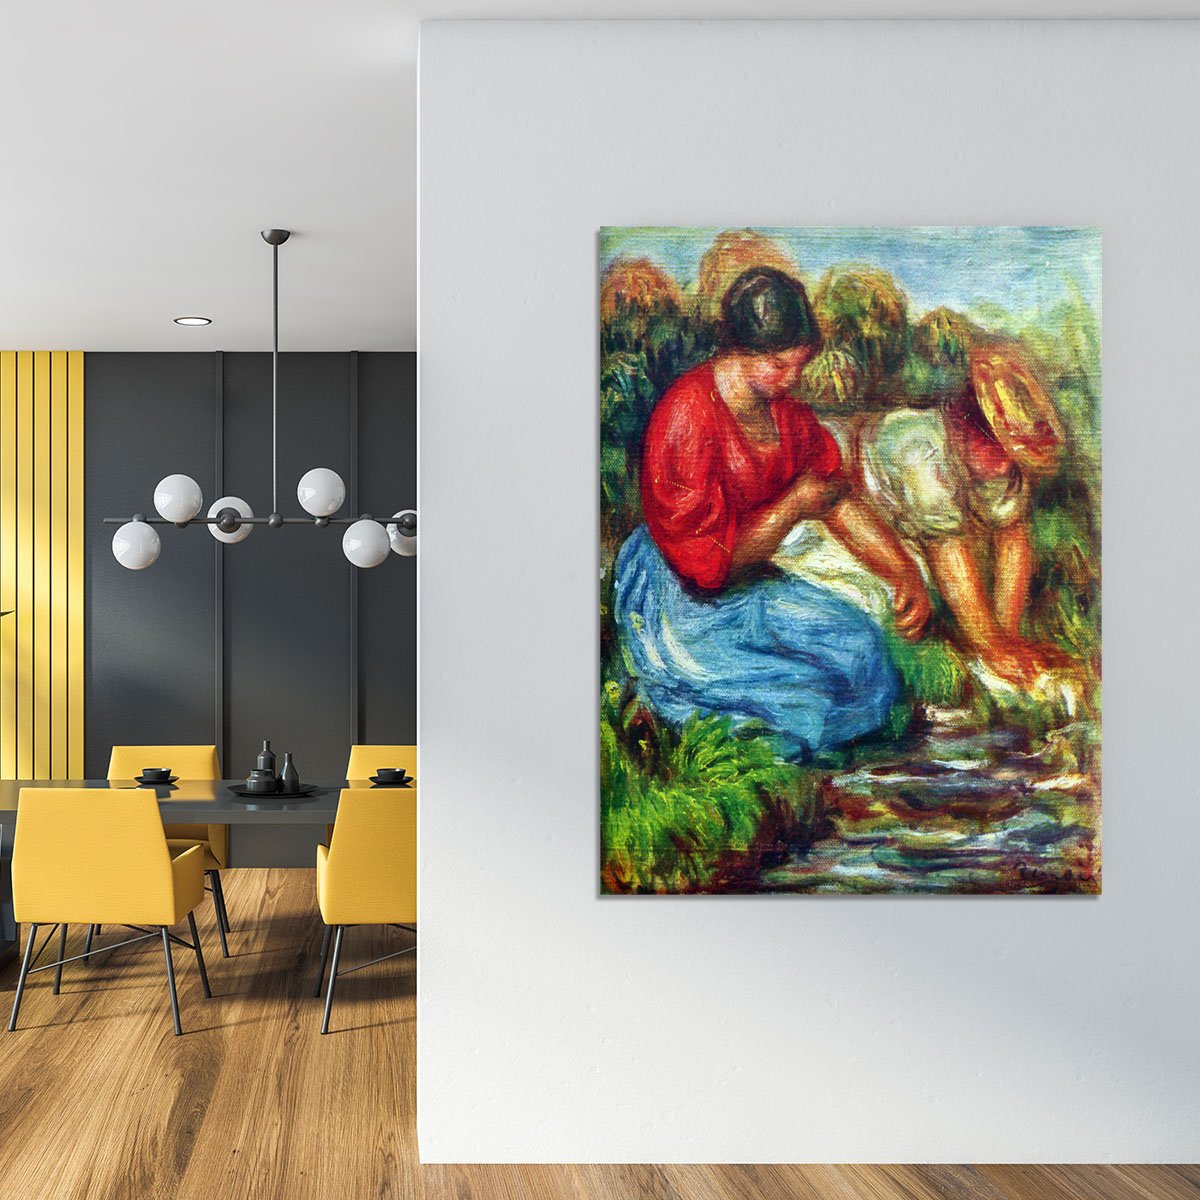 Laundresses 1 by Renoir Canvas Print or Poster